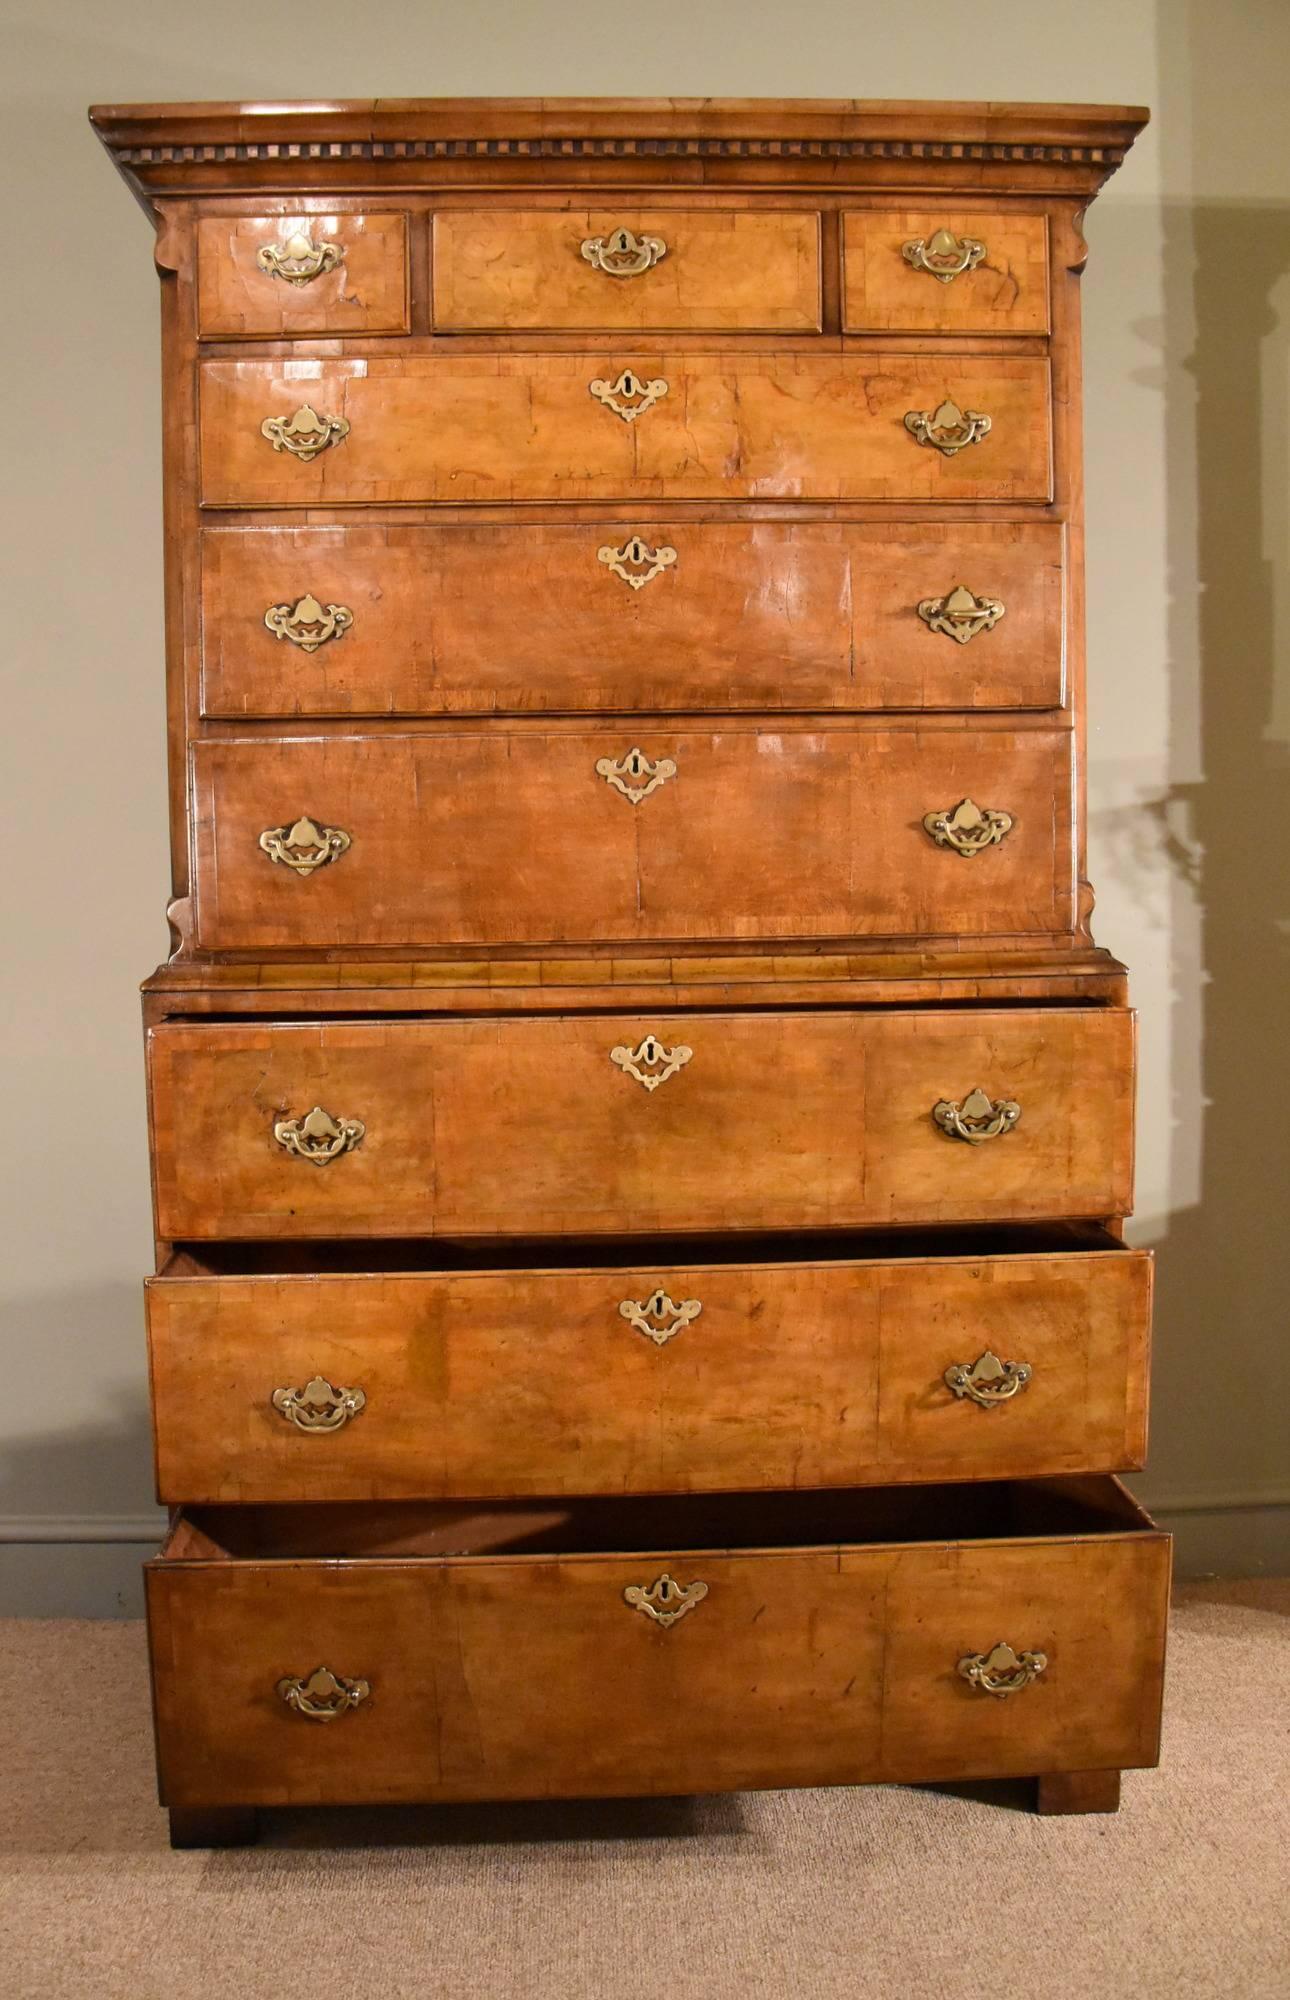 A good George II walnut tallboy chest on chest with fluted columns.
Handles not original

Dimensions
Height 72